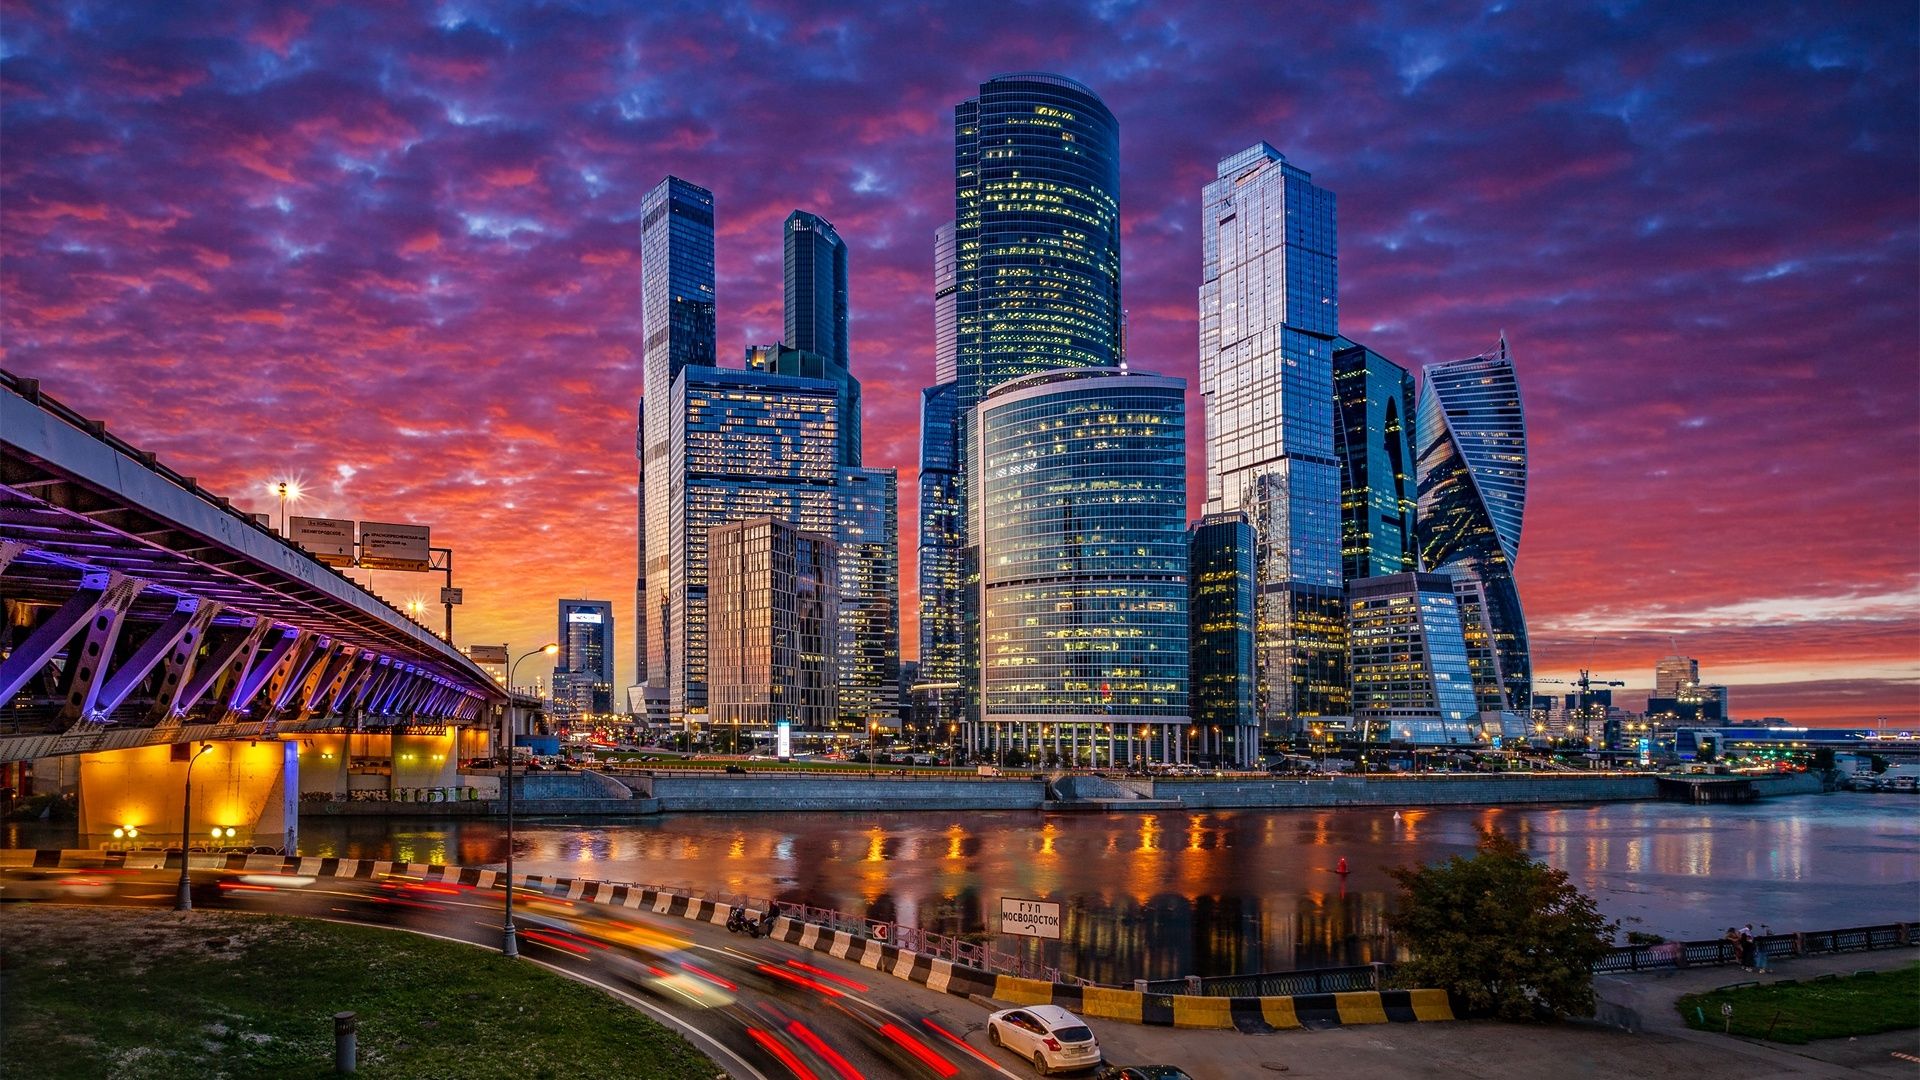 Moscow City At Night Wallpaper, HD City 4K Wallpaper, Image, Photo and Background